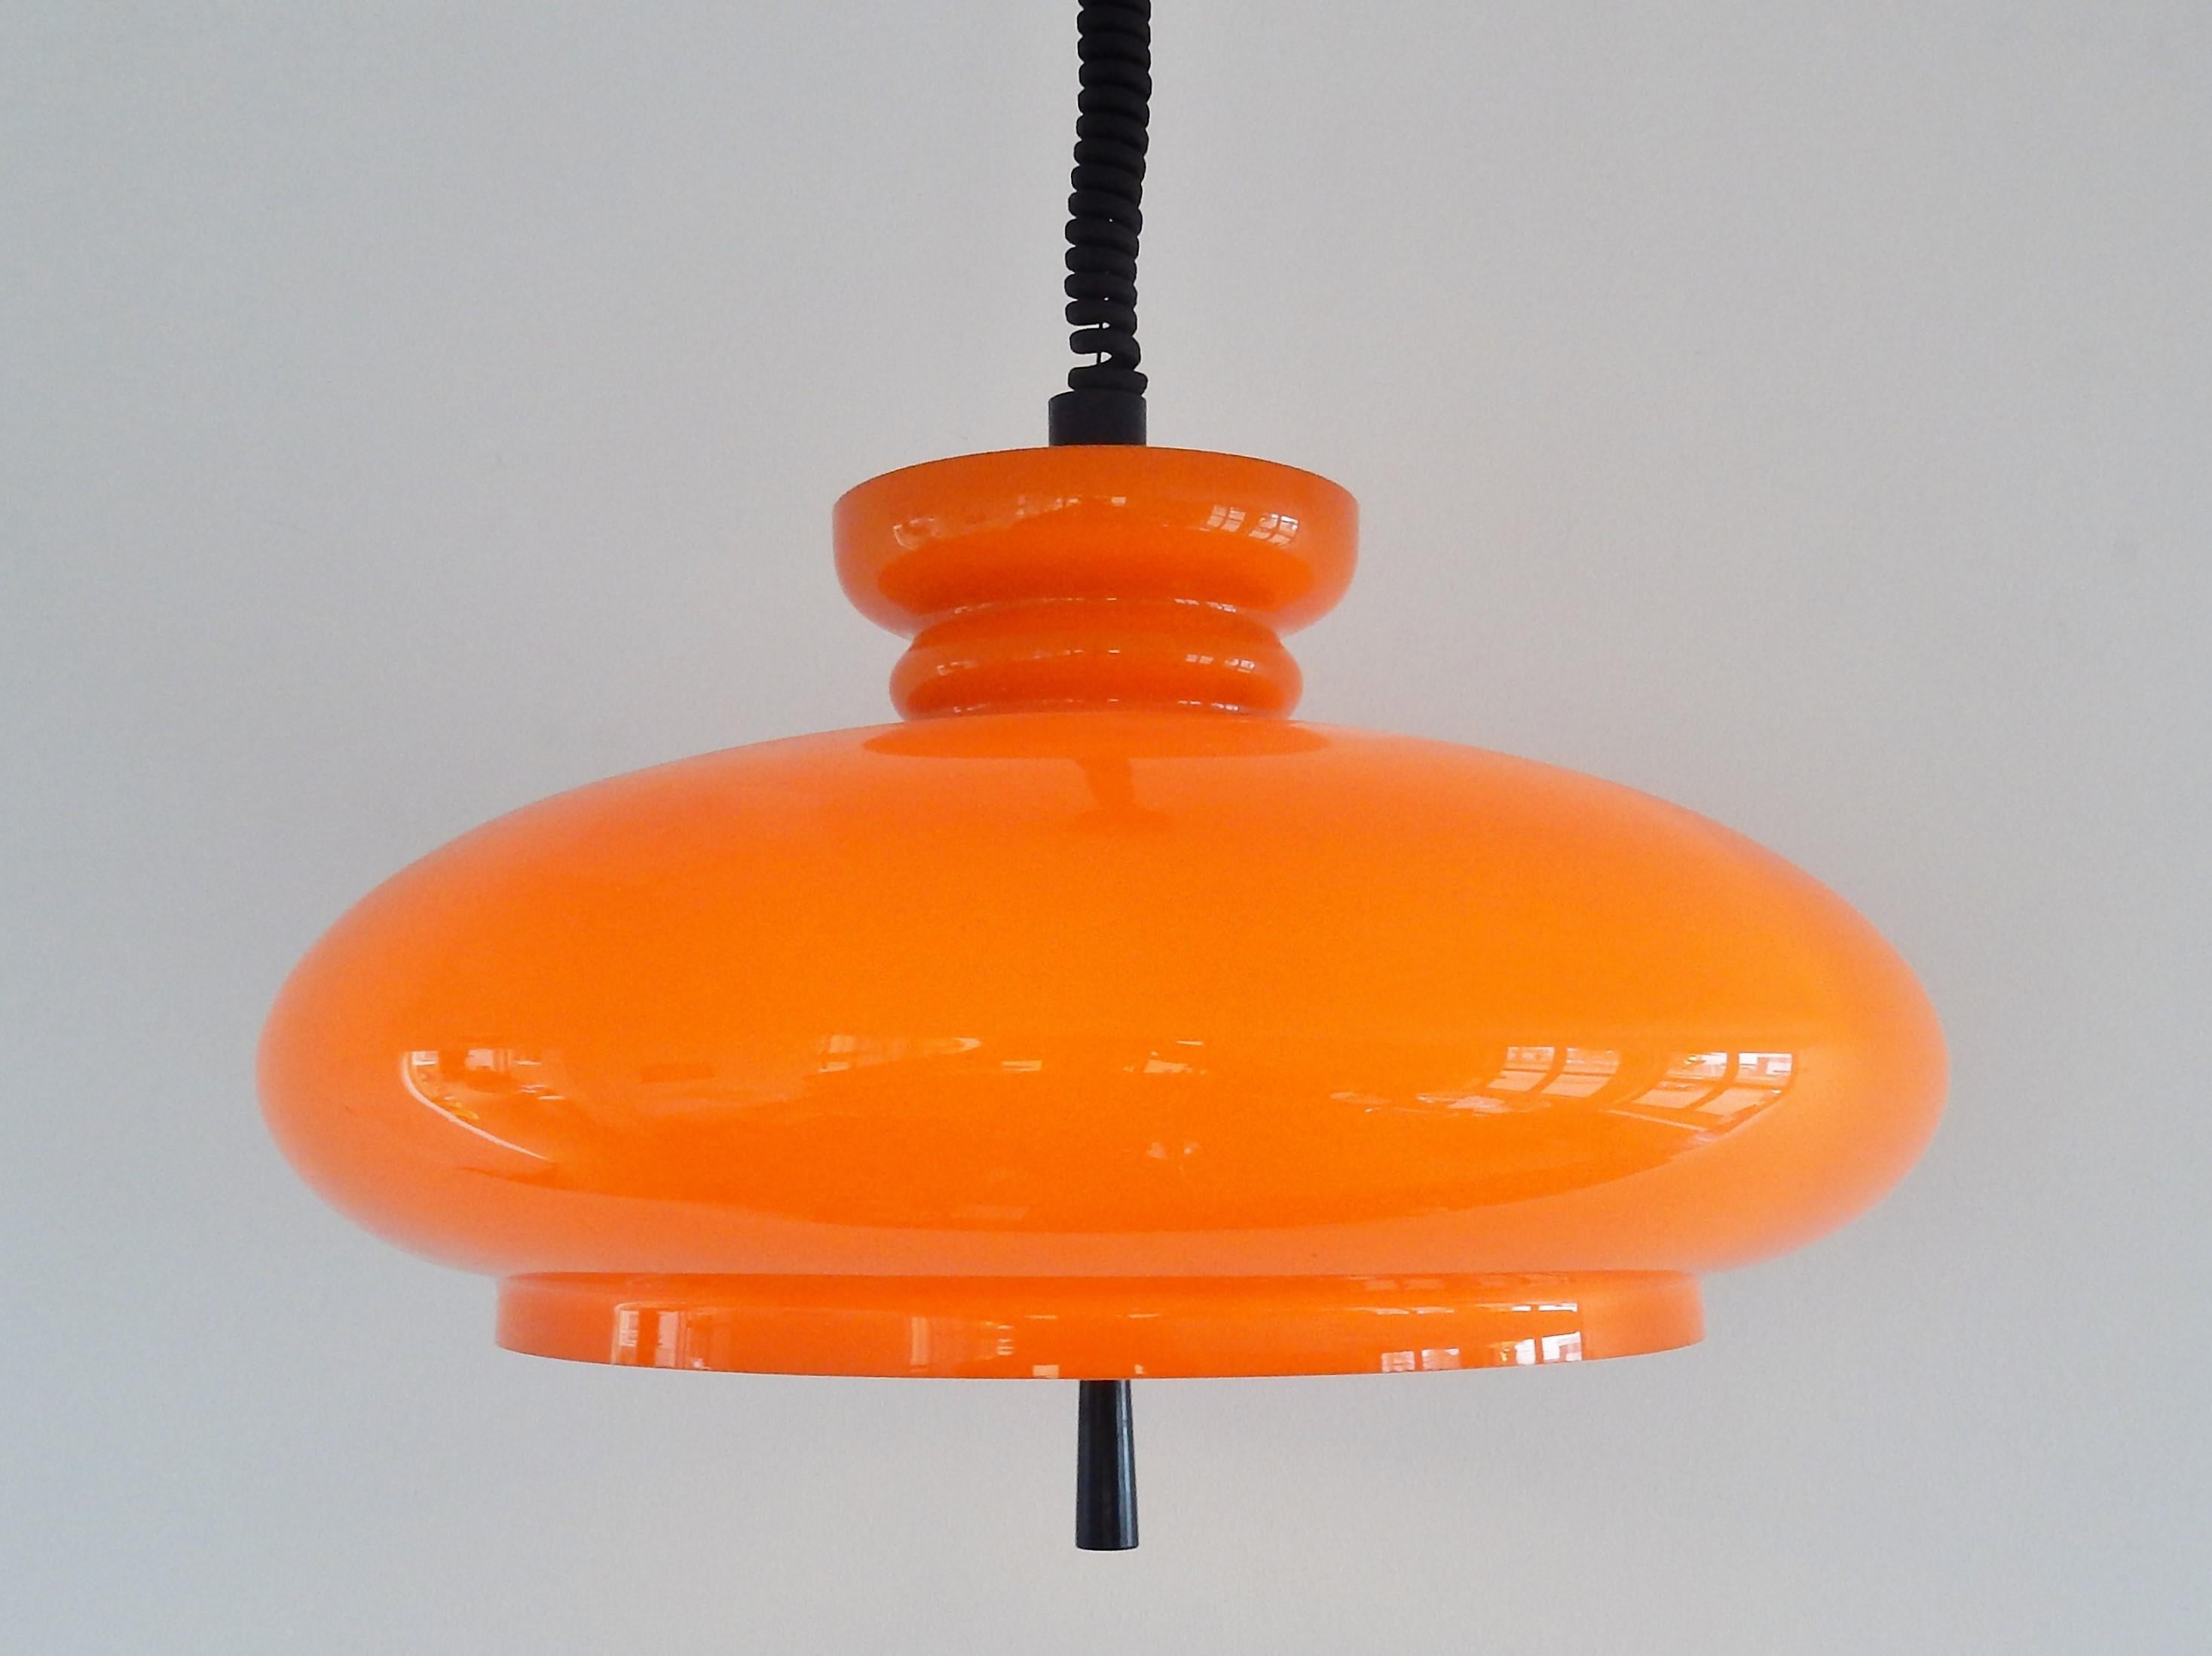 This beautiful orange glass pendant model 'Bowl' was made by RAAK in the 1970s. It is mouth blown and handcut by a master glassblower, that marks the individuality of each lamp. The orange glass, white opaline glass and plastic diffusor inside gives